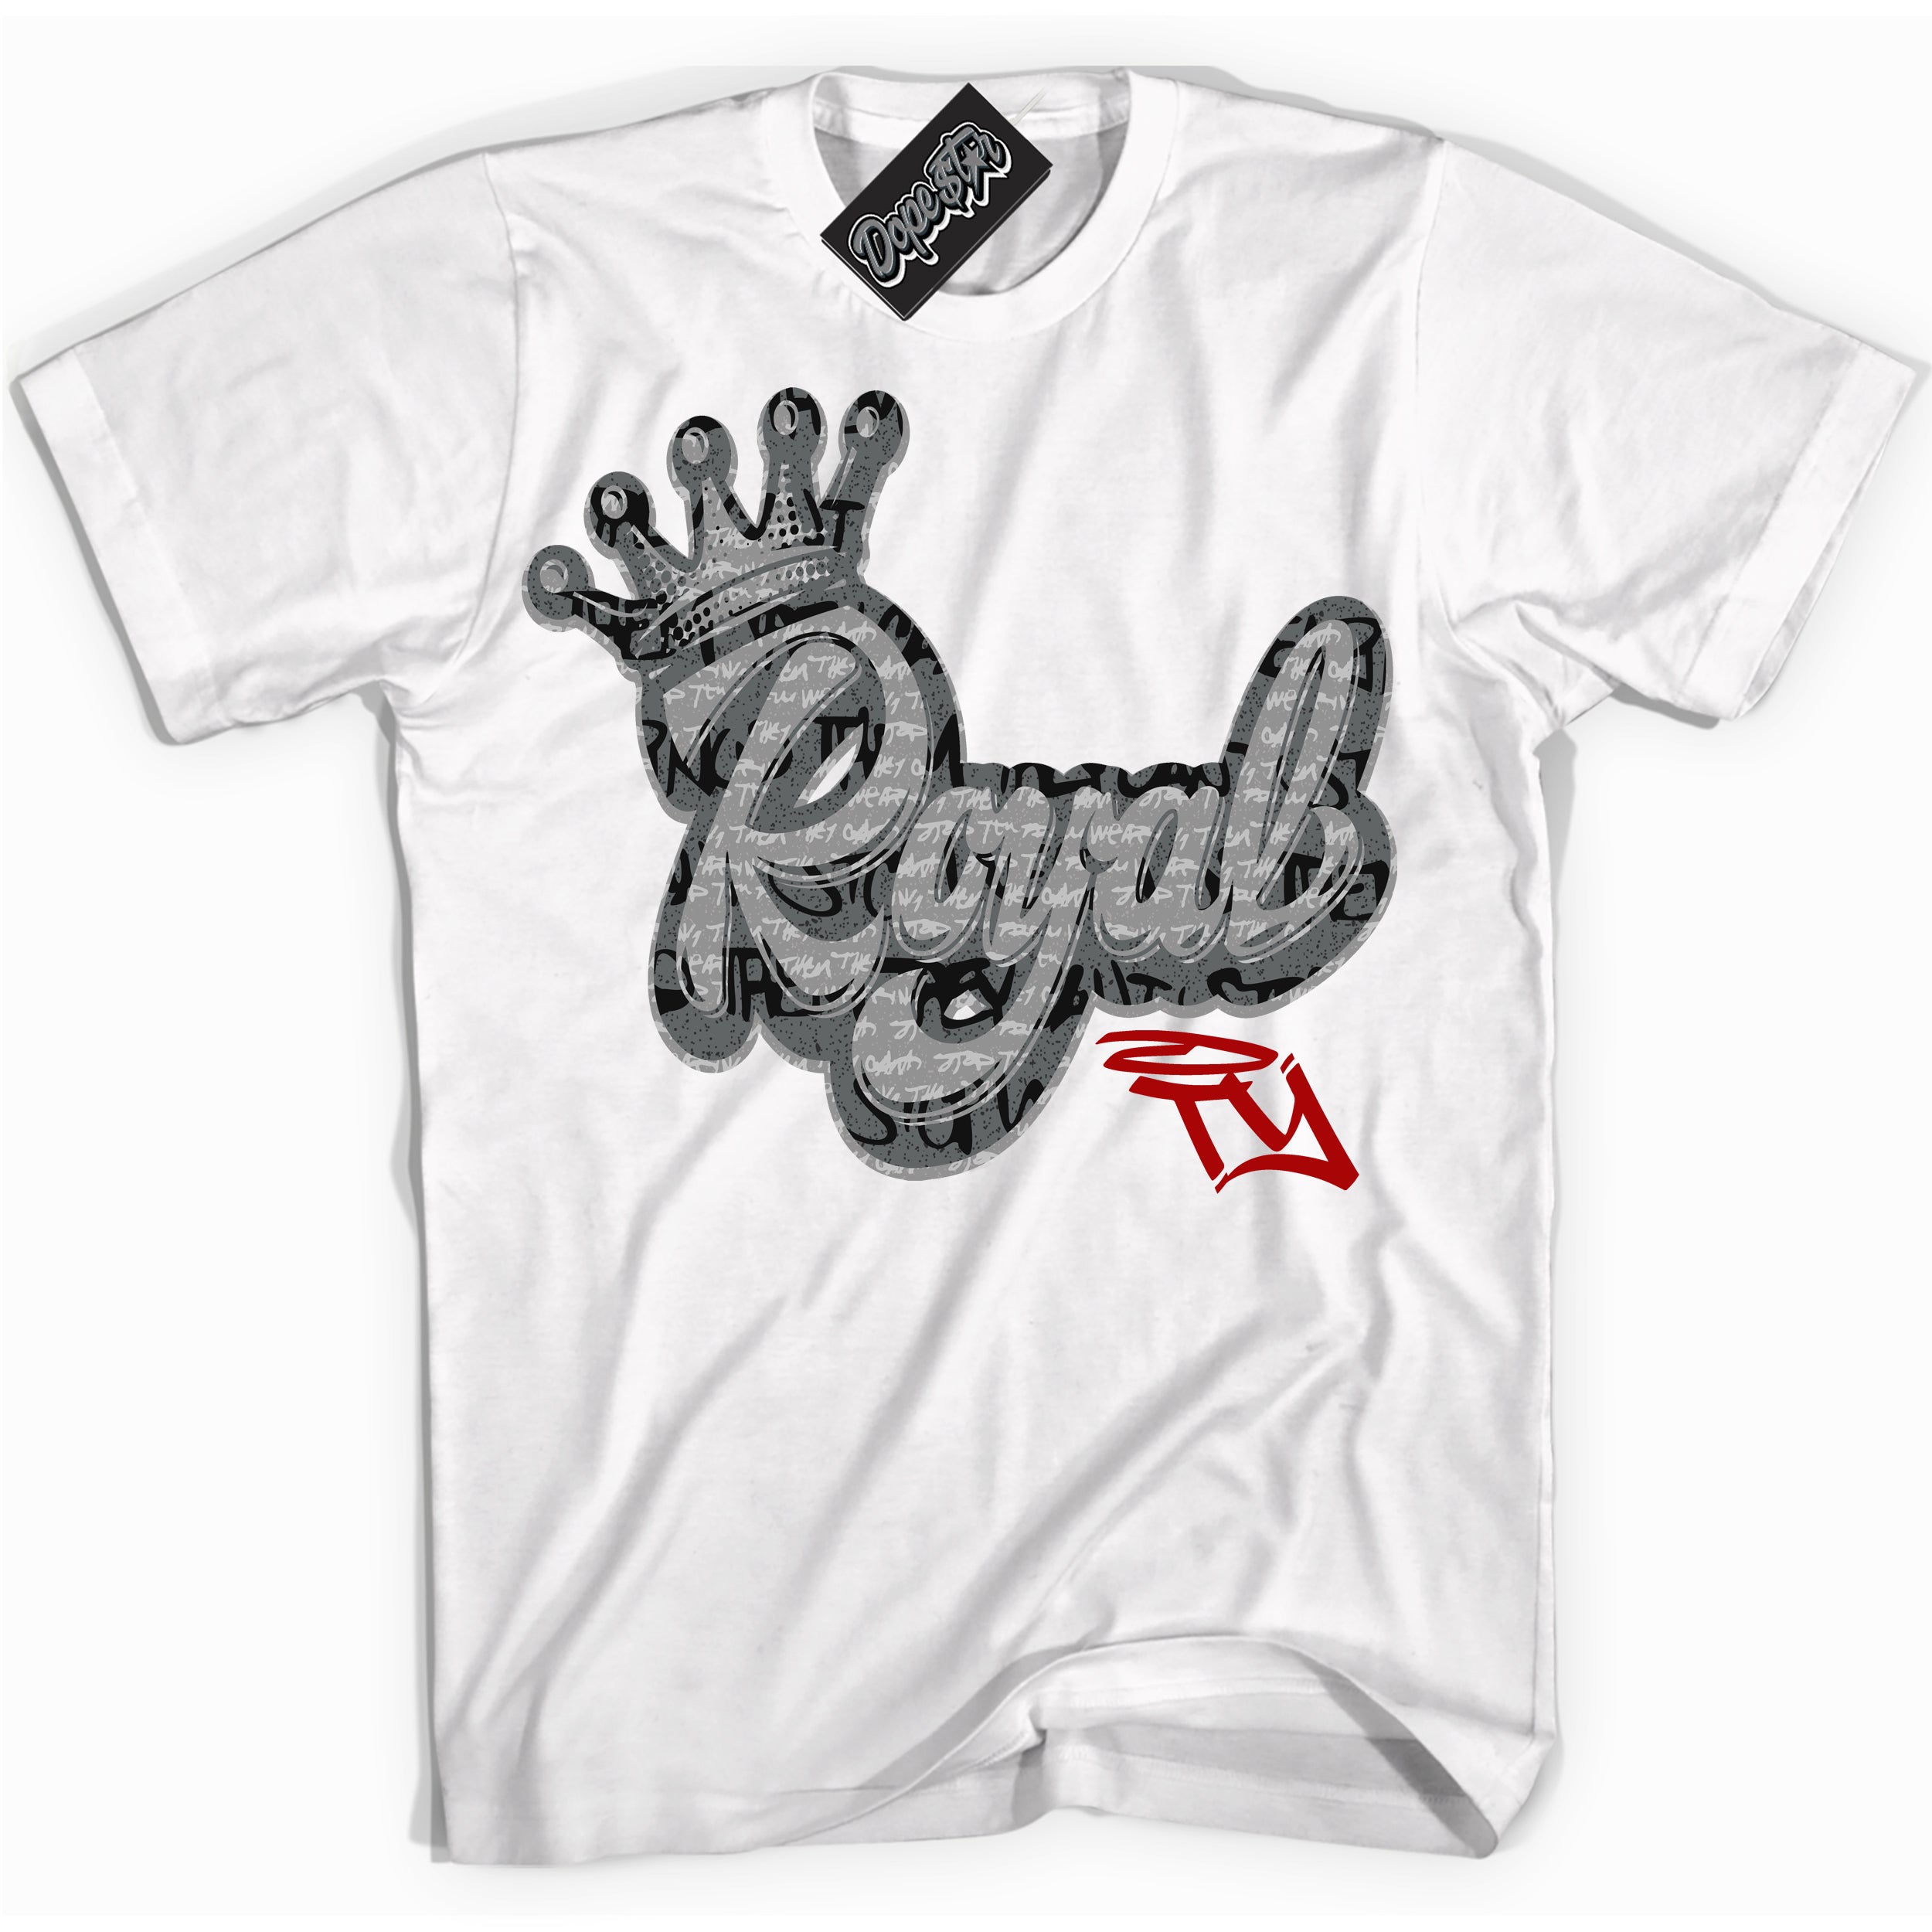 Cool White Shirt with “ Royalty ” design that perfectly matches Rebellionaire 1s Sneakers.